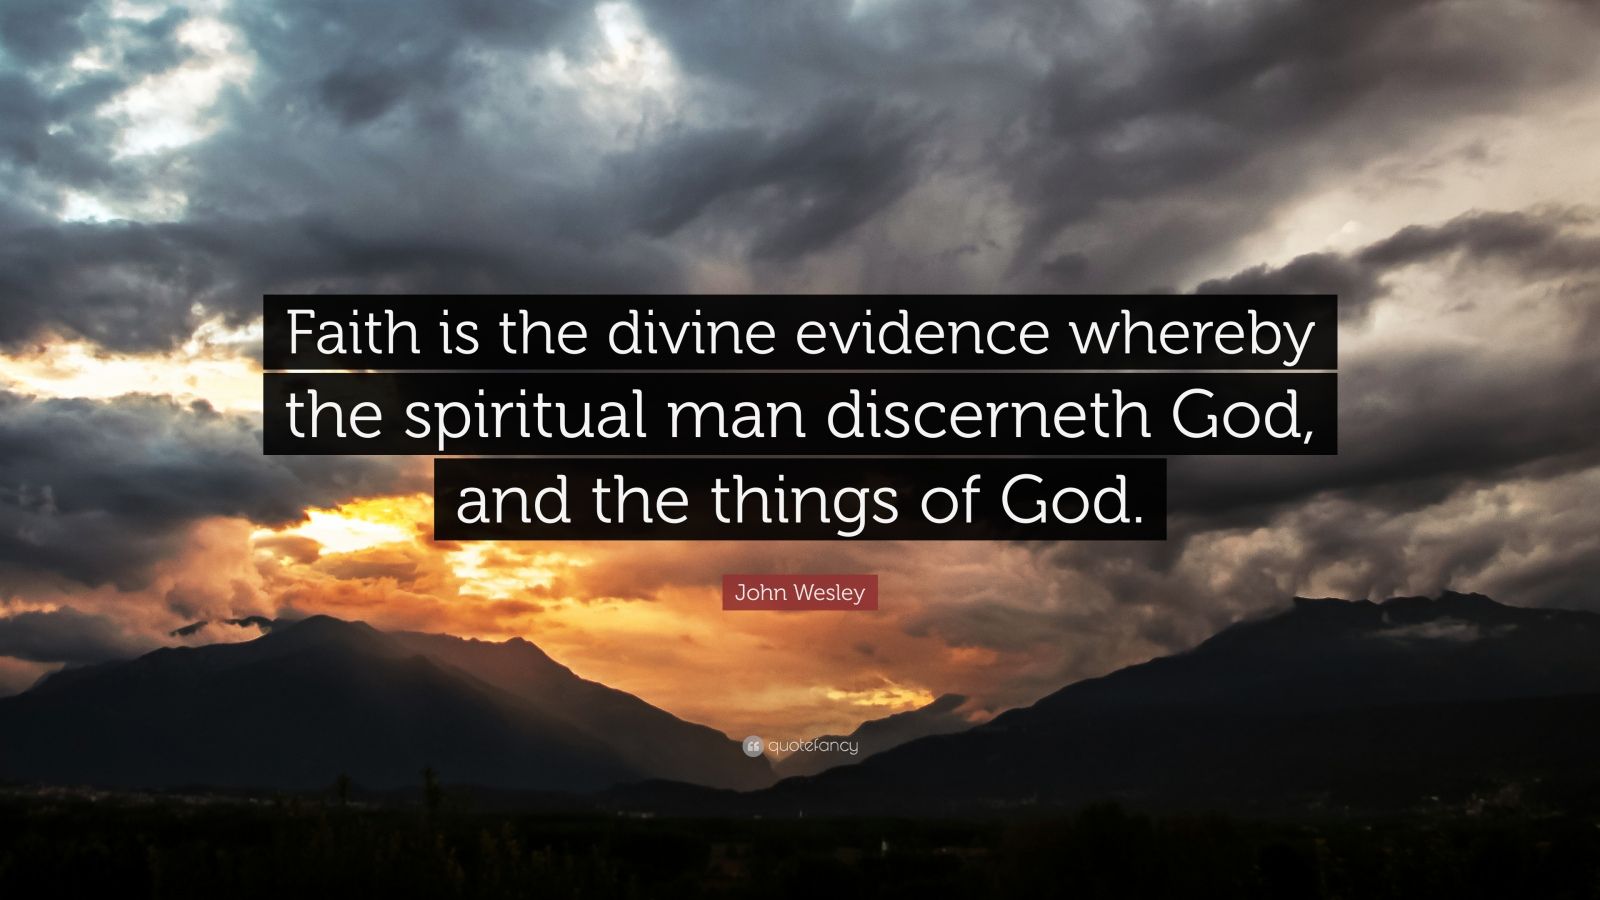 John Wesley Quote: “Faith is the divine evidence whereby the spiritual ...